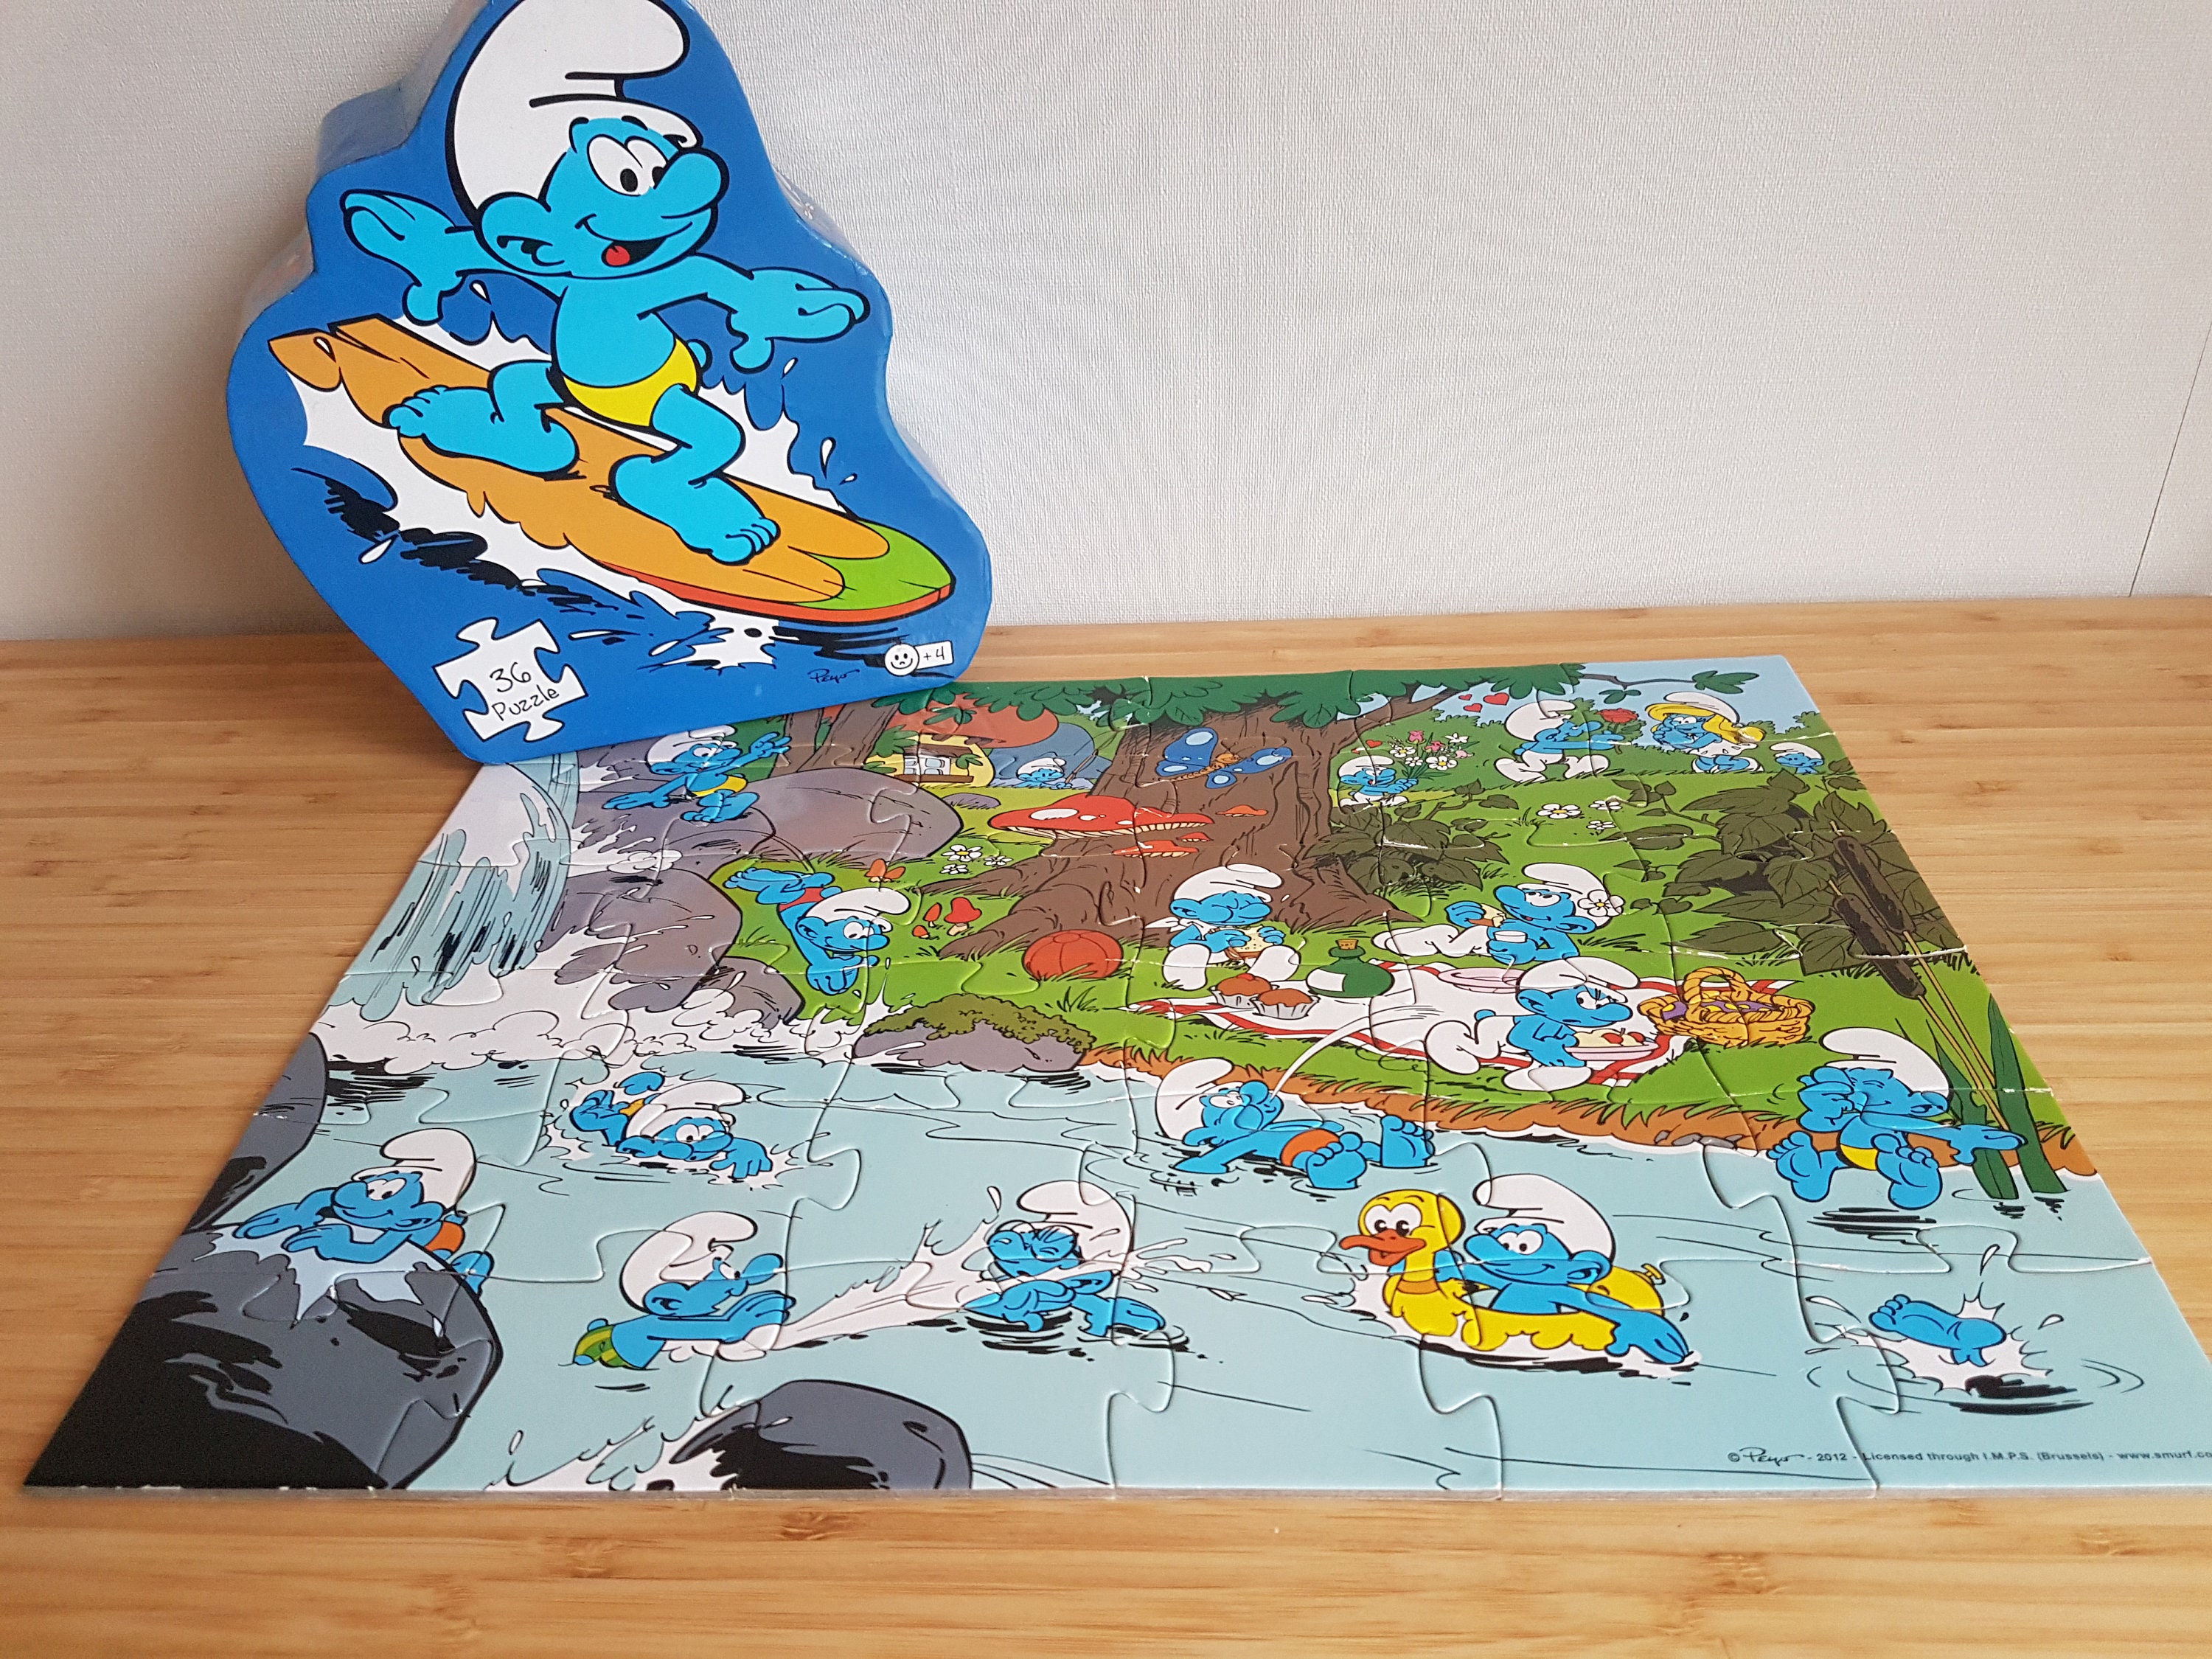 Smurf puzzle - Too many smurfs and Gargamel - Ravensburger - 1000 pieces